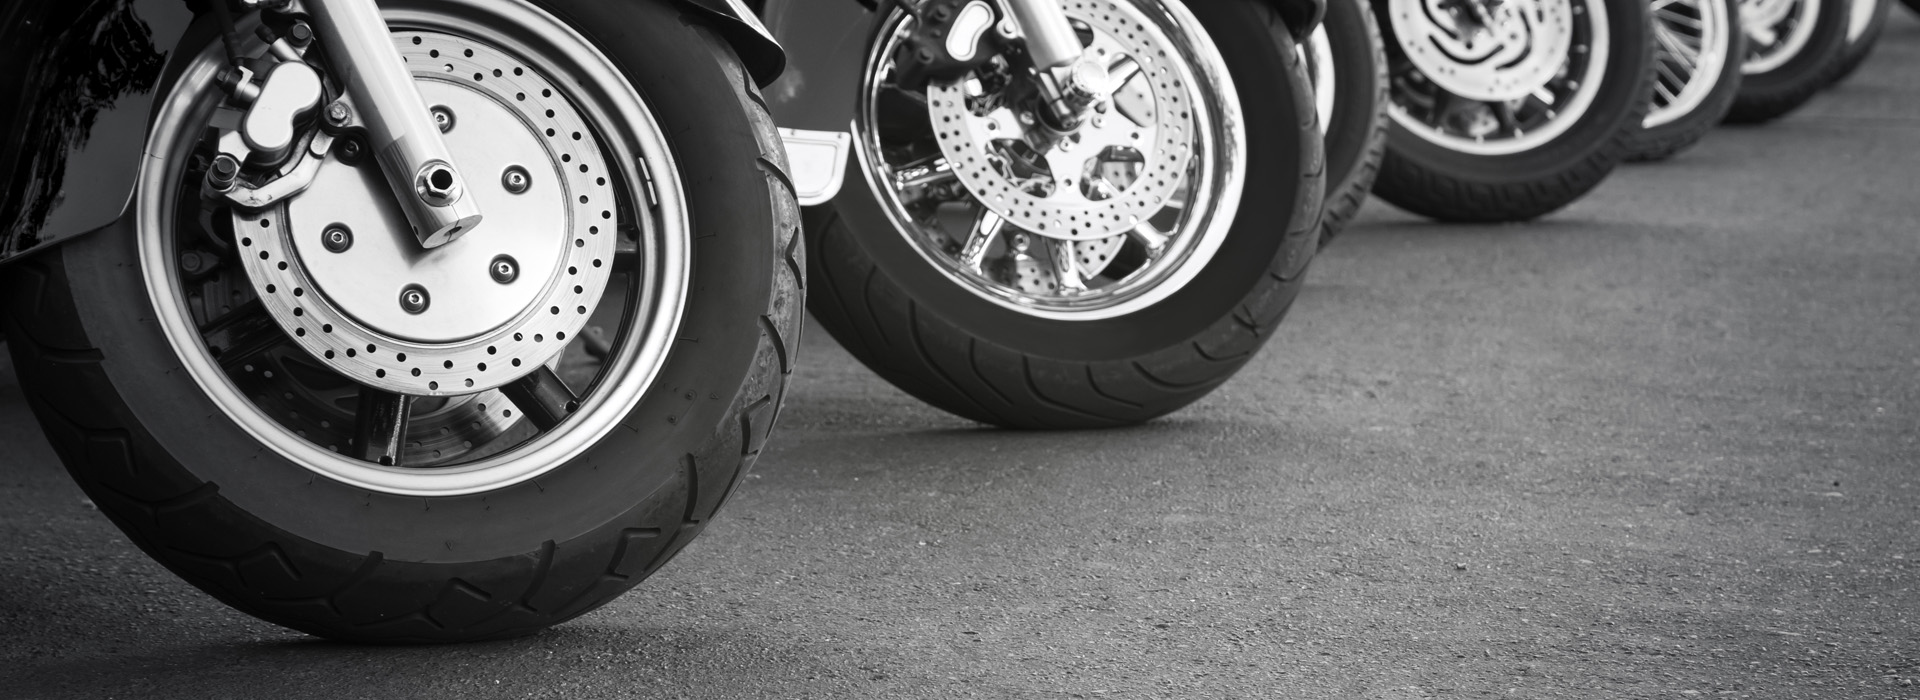 Filing a Motorcycle Accident Lawsuit in Arizona